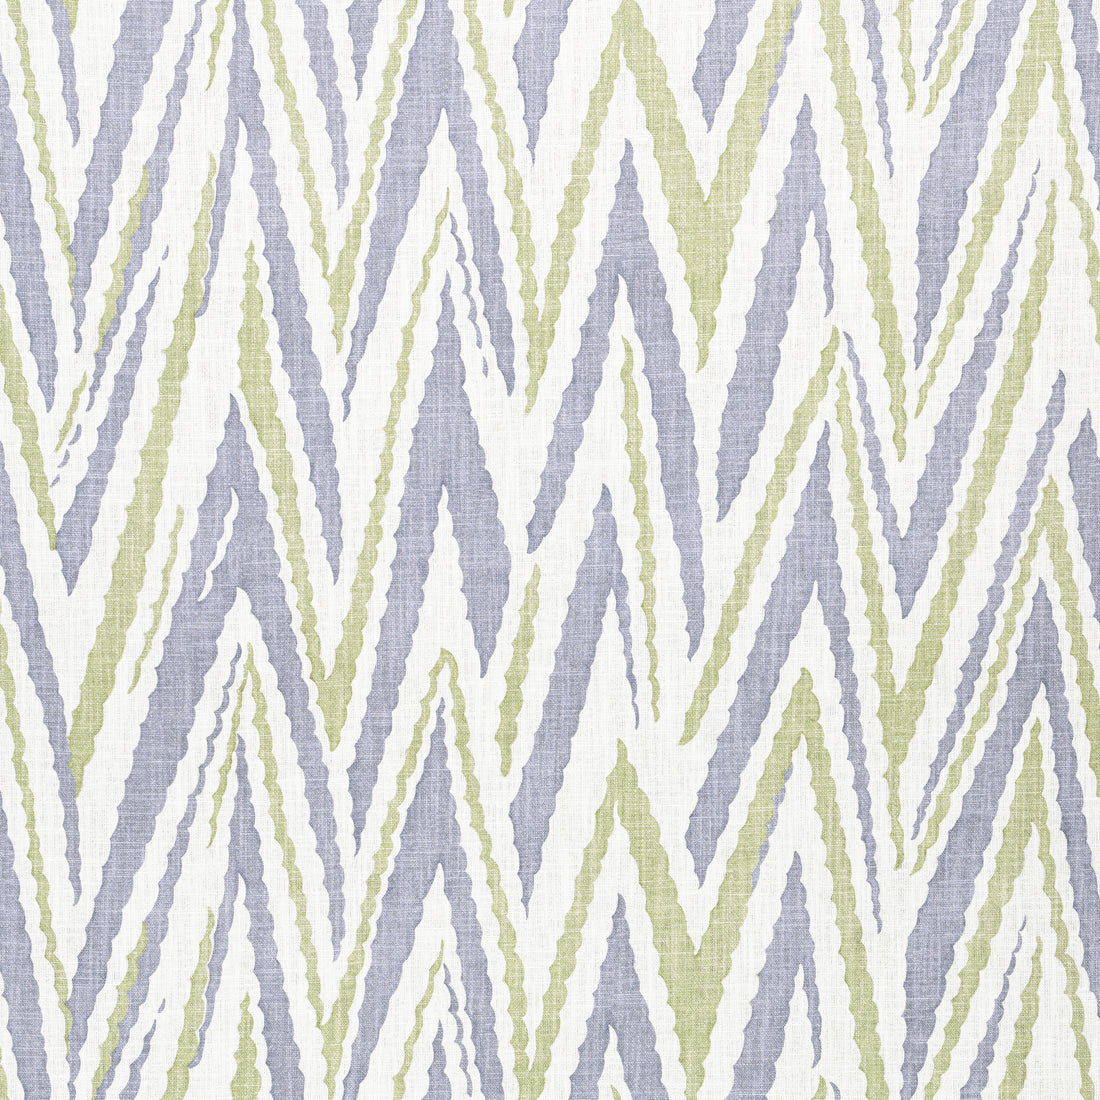 Highland Peak fabric in plum and sage color - pattern number AF23143 - by Anna French in the Willow Tree collection